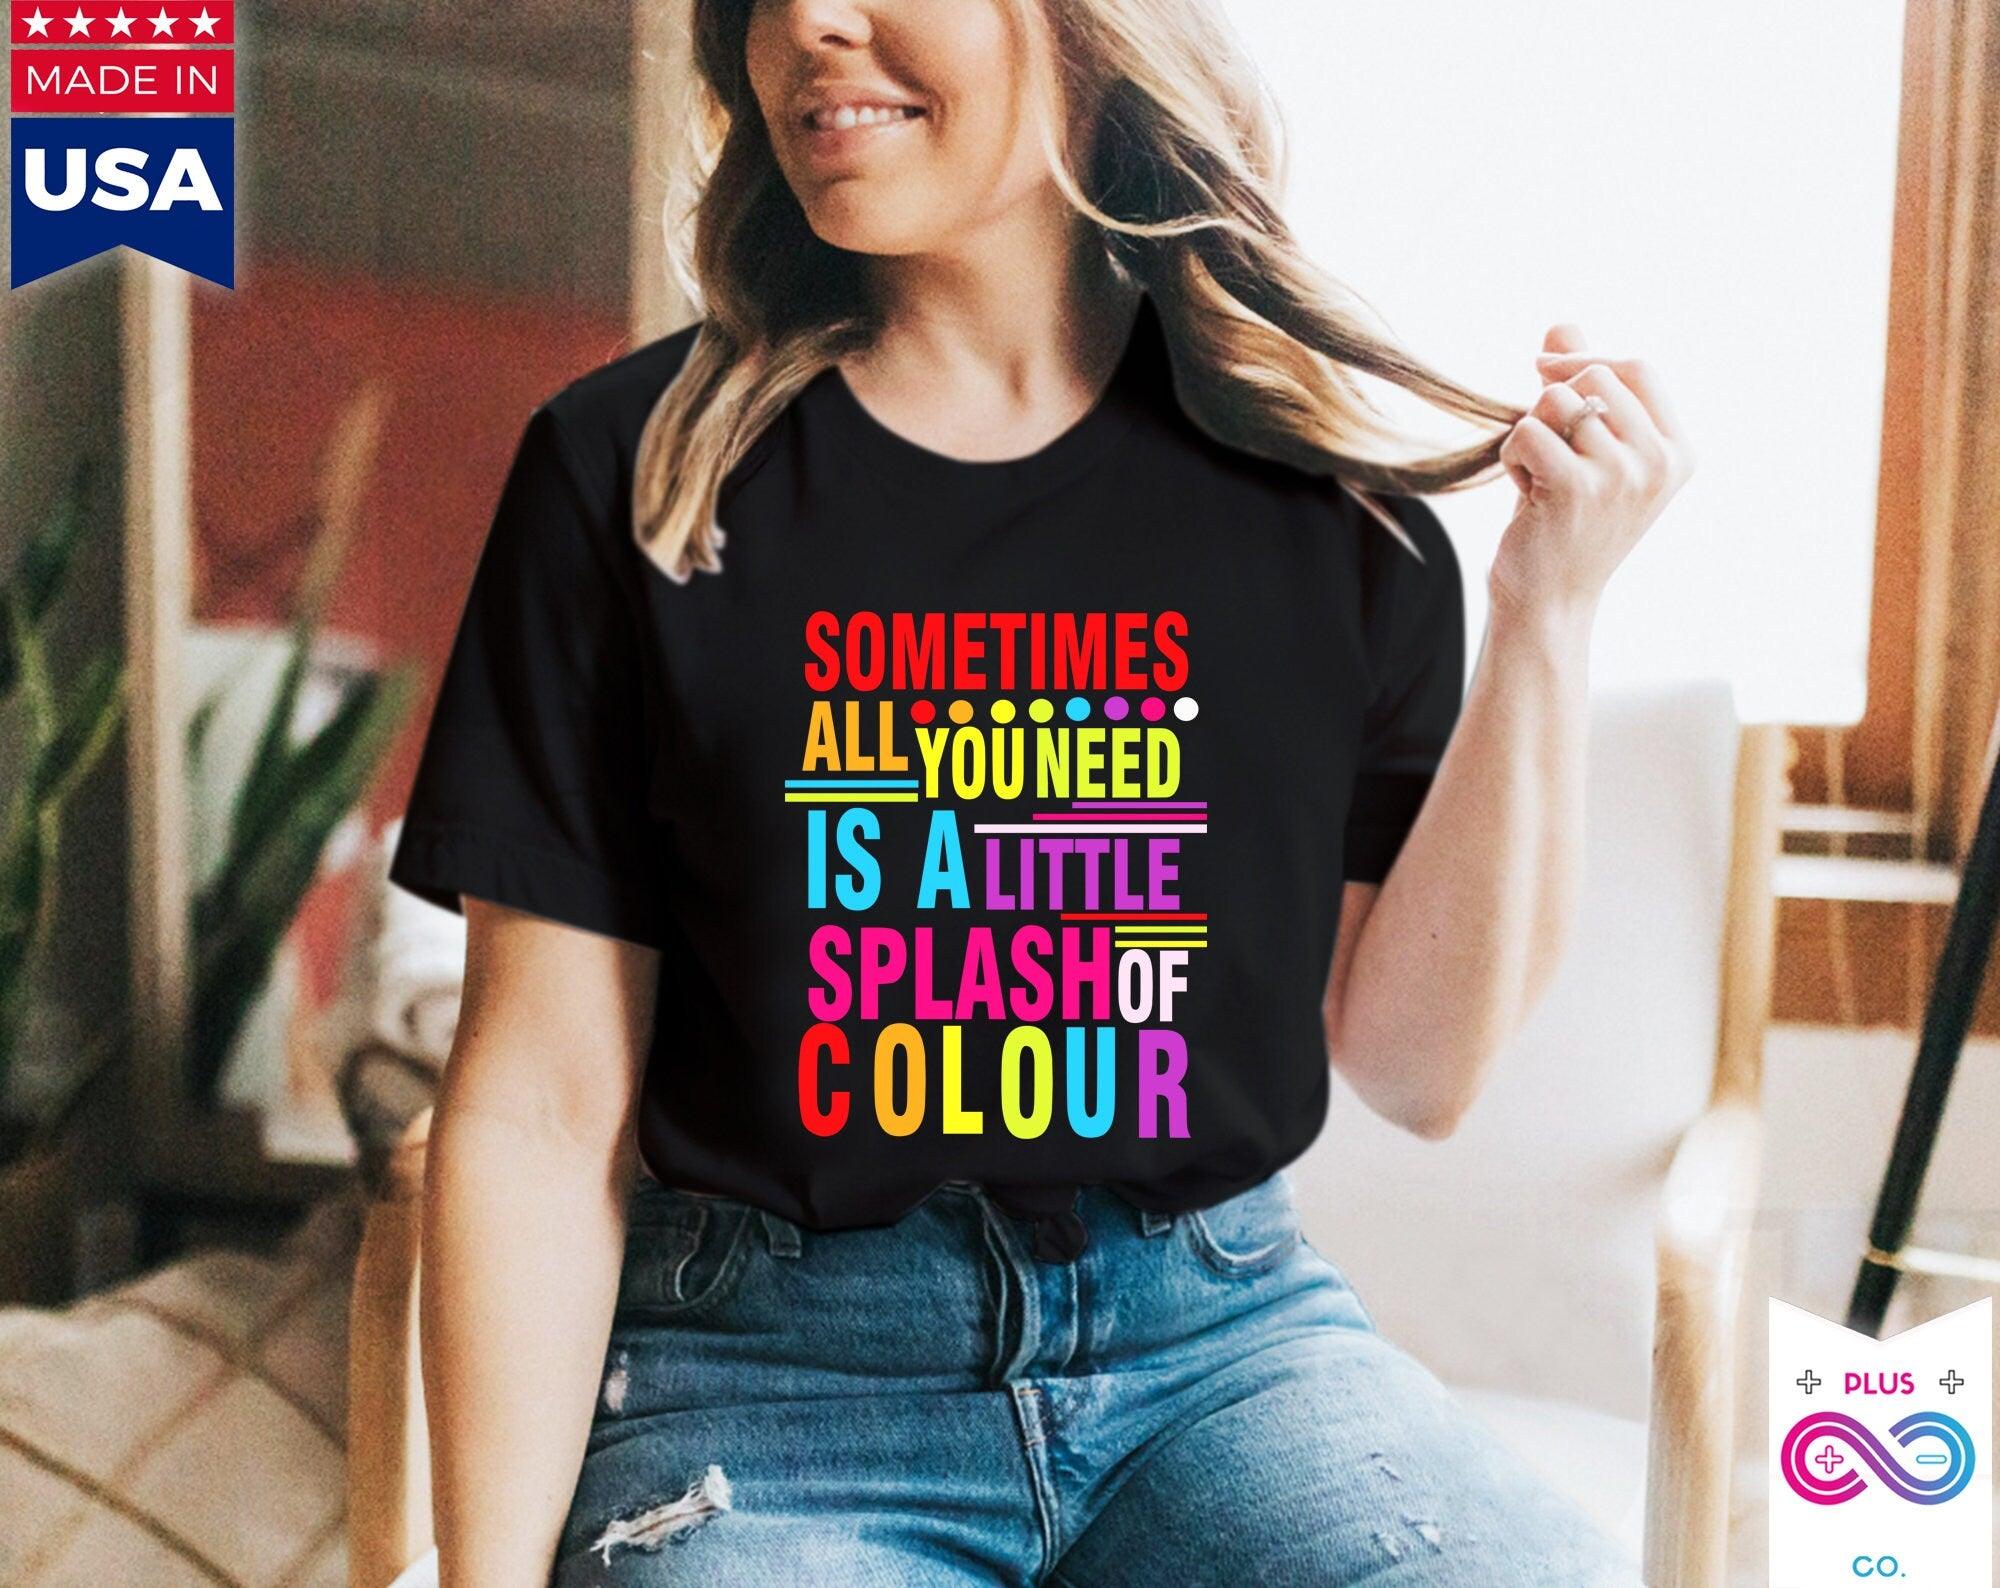 Sometimes All You Need Is A Little Splash of Colour Shirt, Positive Vibes, Inspiring Graphic Shirt, Colorful Shirt, Summer Beach Shirt all you need Is, Artist tshirt, beach shirt, colorful shirt, graphic shirt, inspiring shirt, motivation gifts, painter shirt, positive vibes, splash of colour, streetwear shirt, summer shirt, Tee, tees, Trendy t shirts - plusminusco.com